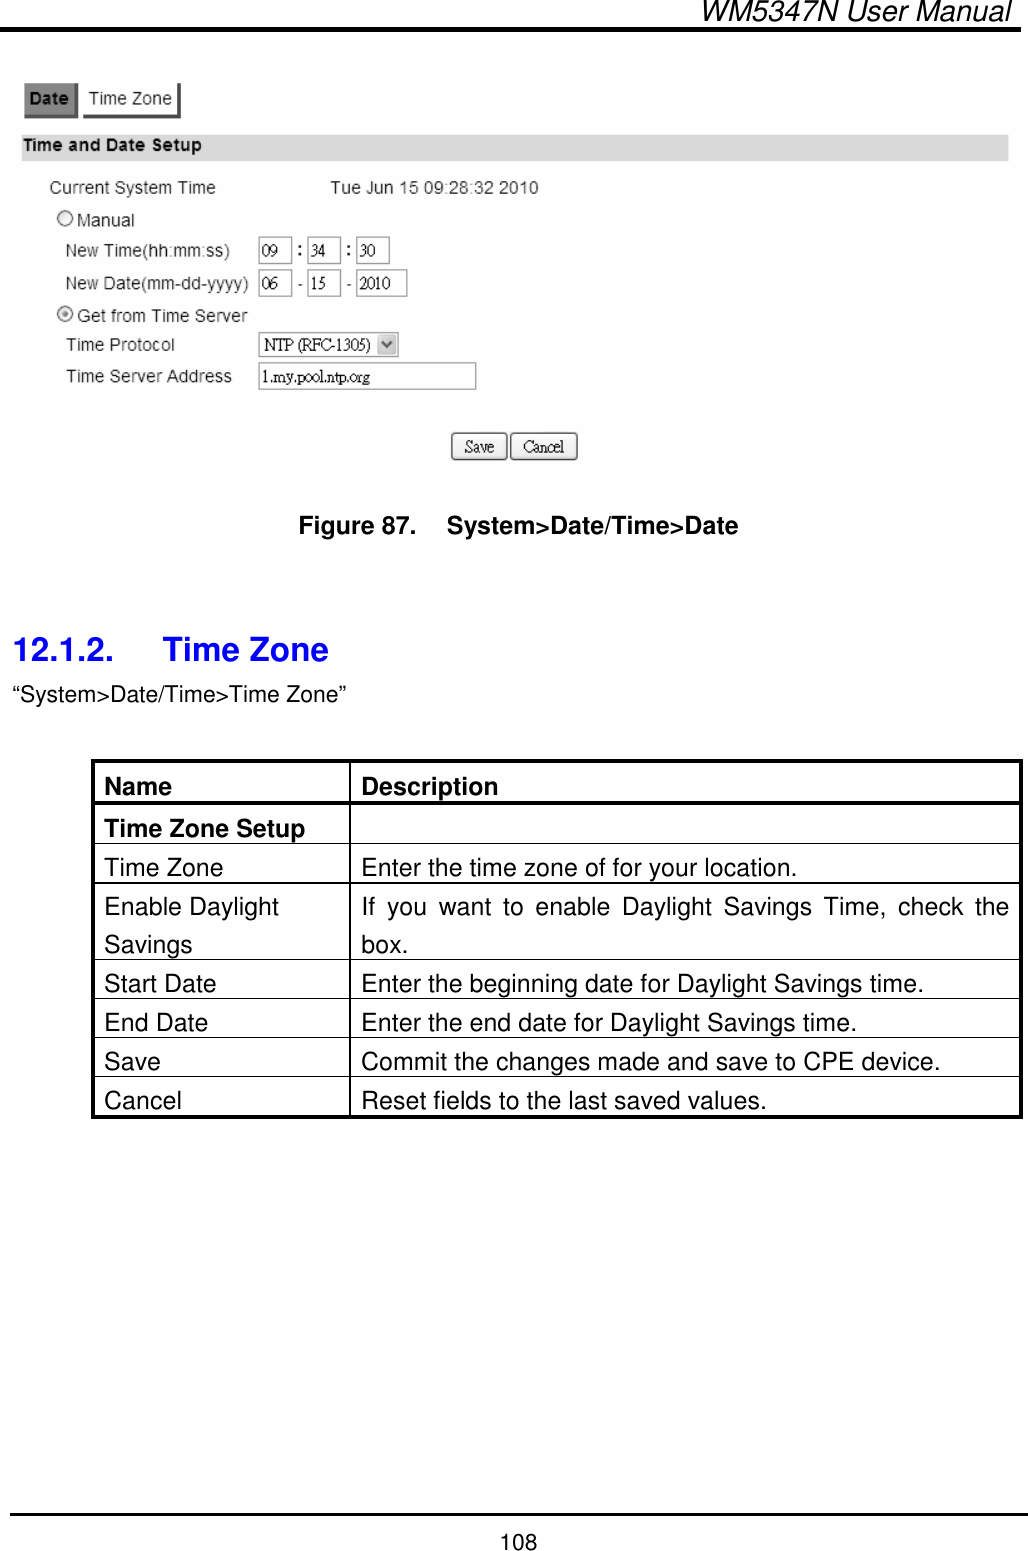  WM5347N User Manual  108  Figure 87.   System&gt;Date/Time&gt;Date   12.1.2.  Time Zone “System&gt;Date/Time&gt;Time Zone”  Name  Description Time Zone Setup   Time Zone  Enter the time zone of for your location. Enable Daylight Savings If  you  want  to  enable  Daylight  Savings  Time,  check  the box. Start Date  Enter the beginning date for Daylight Savings time. End Date  Enter the end date for Daylight Savings time. Save  Commit the changes made and save to CPE device. Cancel  Reset fields to the last saved values.  